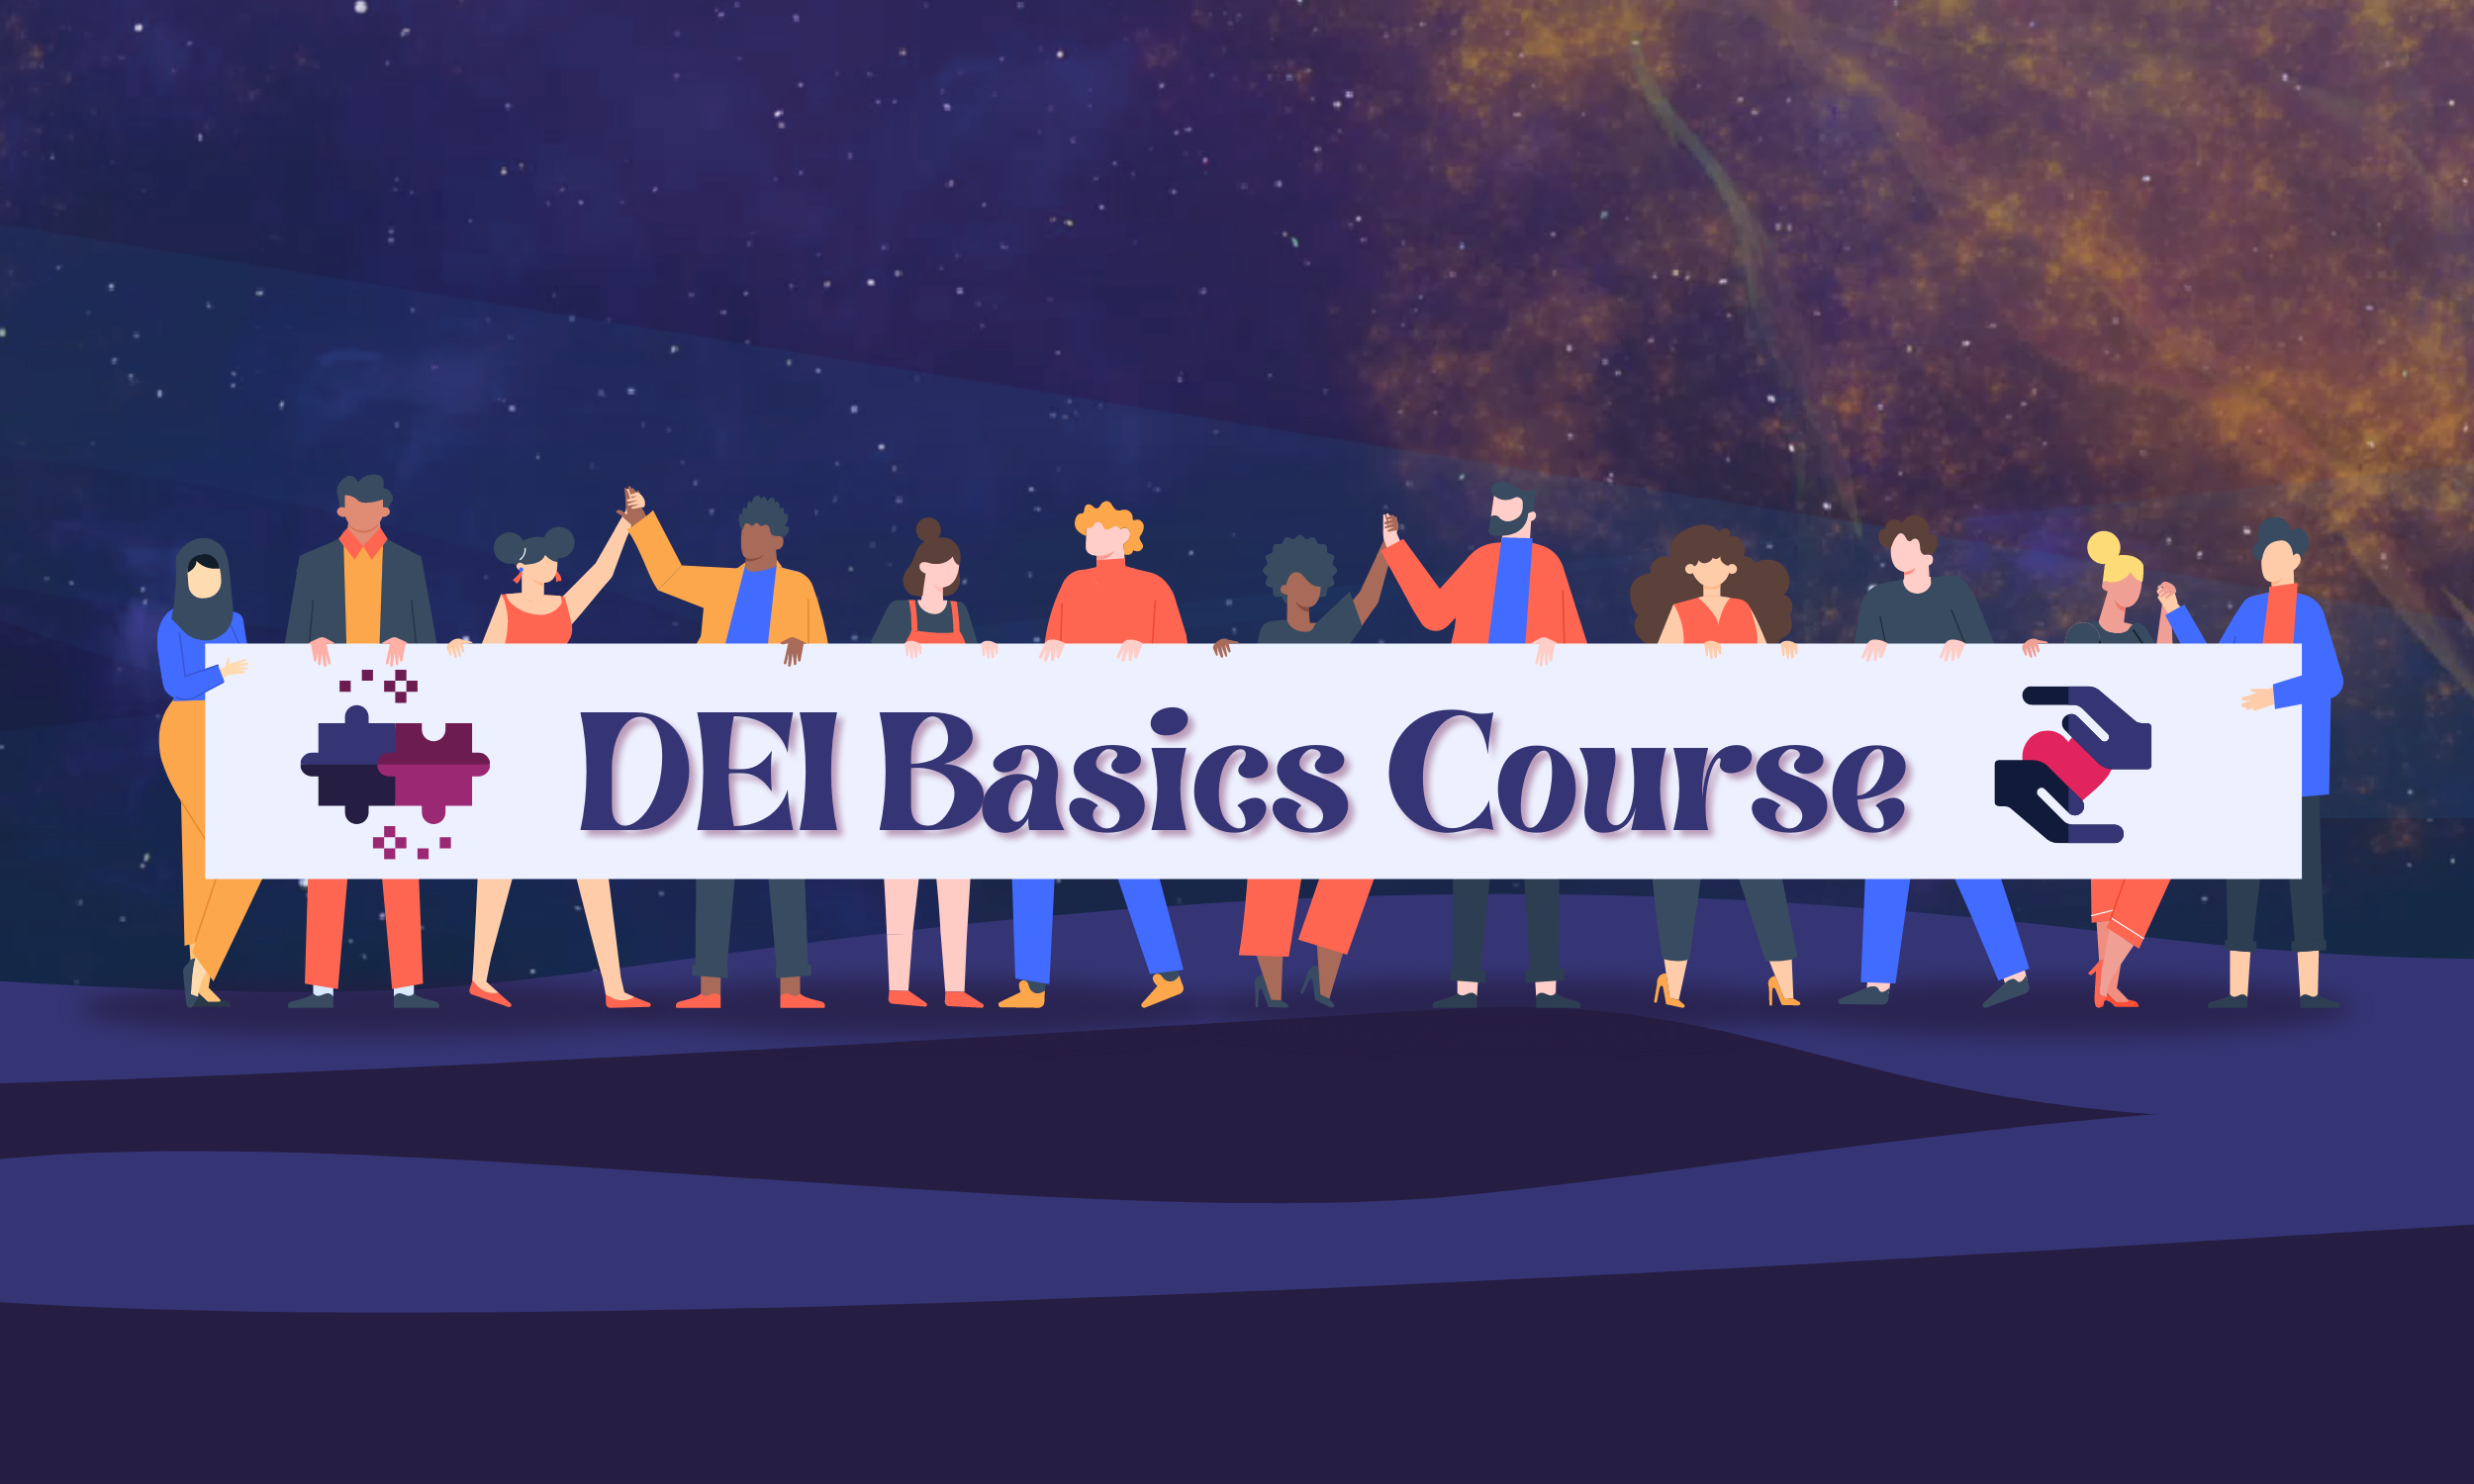 Graphic of a large and diverse group of people hold a banner reading "DEI Basics Course"